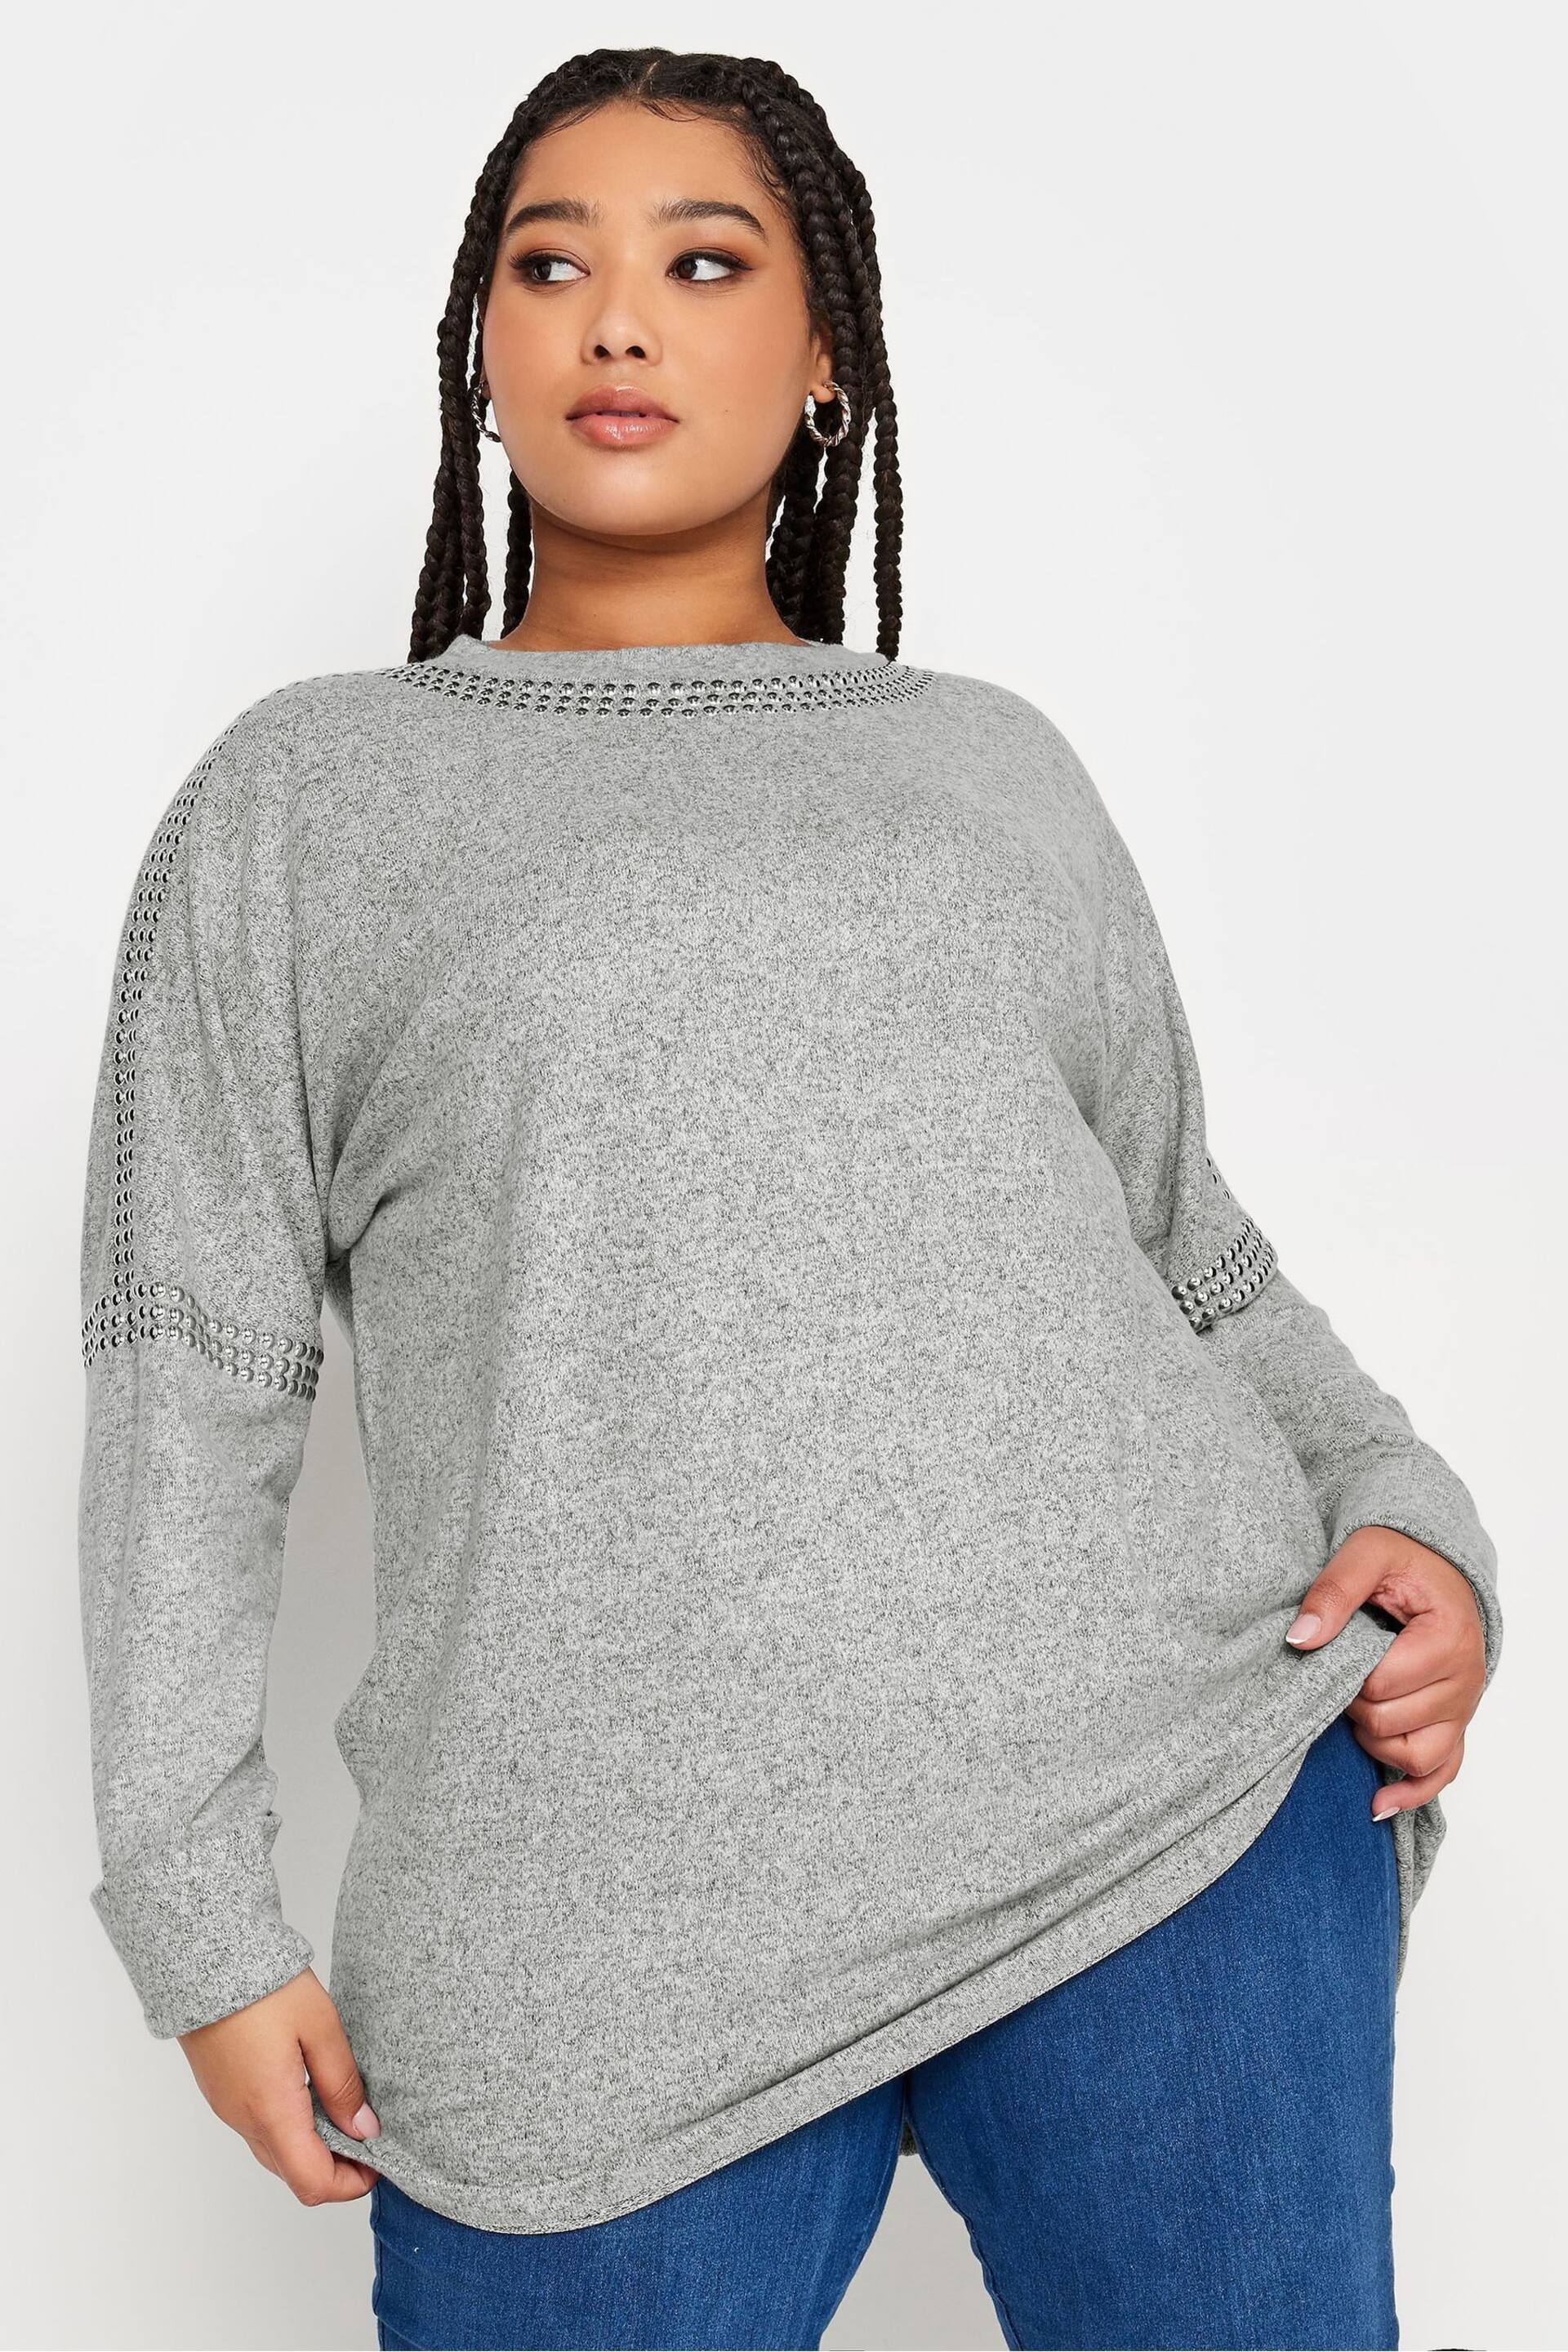 Yours Curve Grey Studded Batwing Jumper - Image 1 of 4